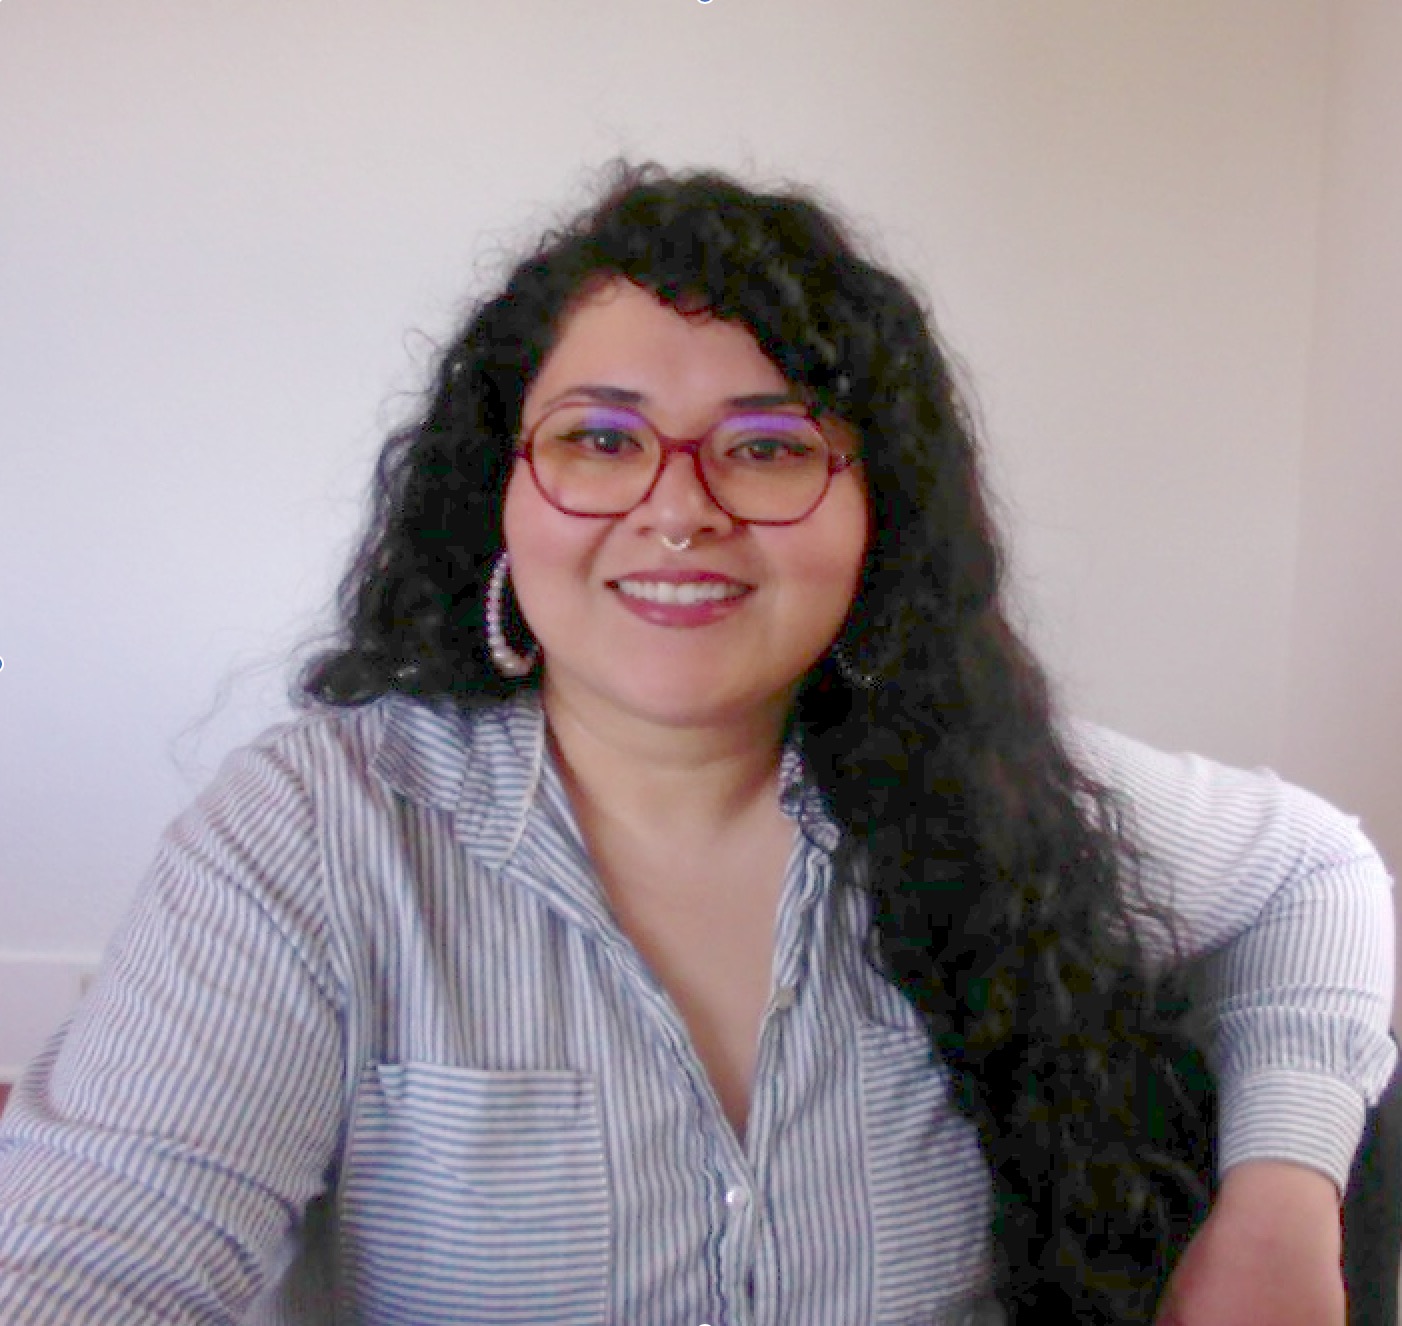 Melina smiling and looking at the camera. She is wearing a white blue-stripped blouse, long brown hair, and glasses.